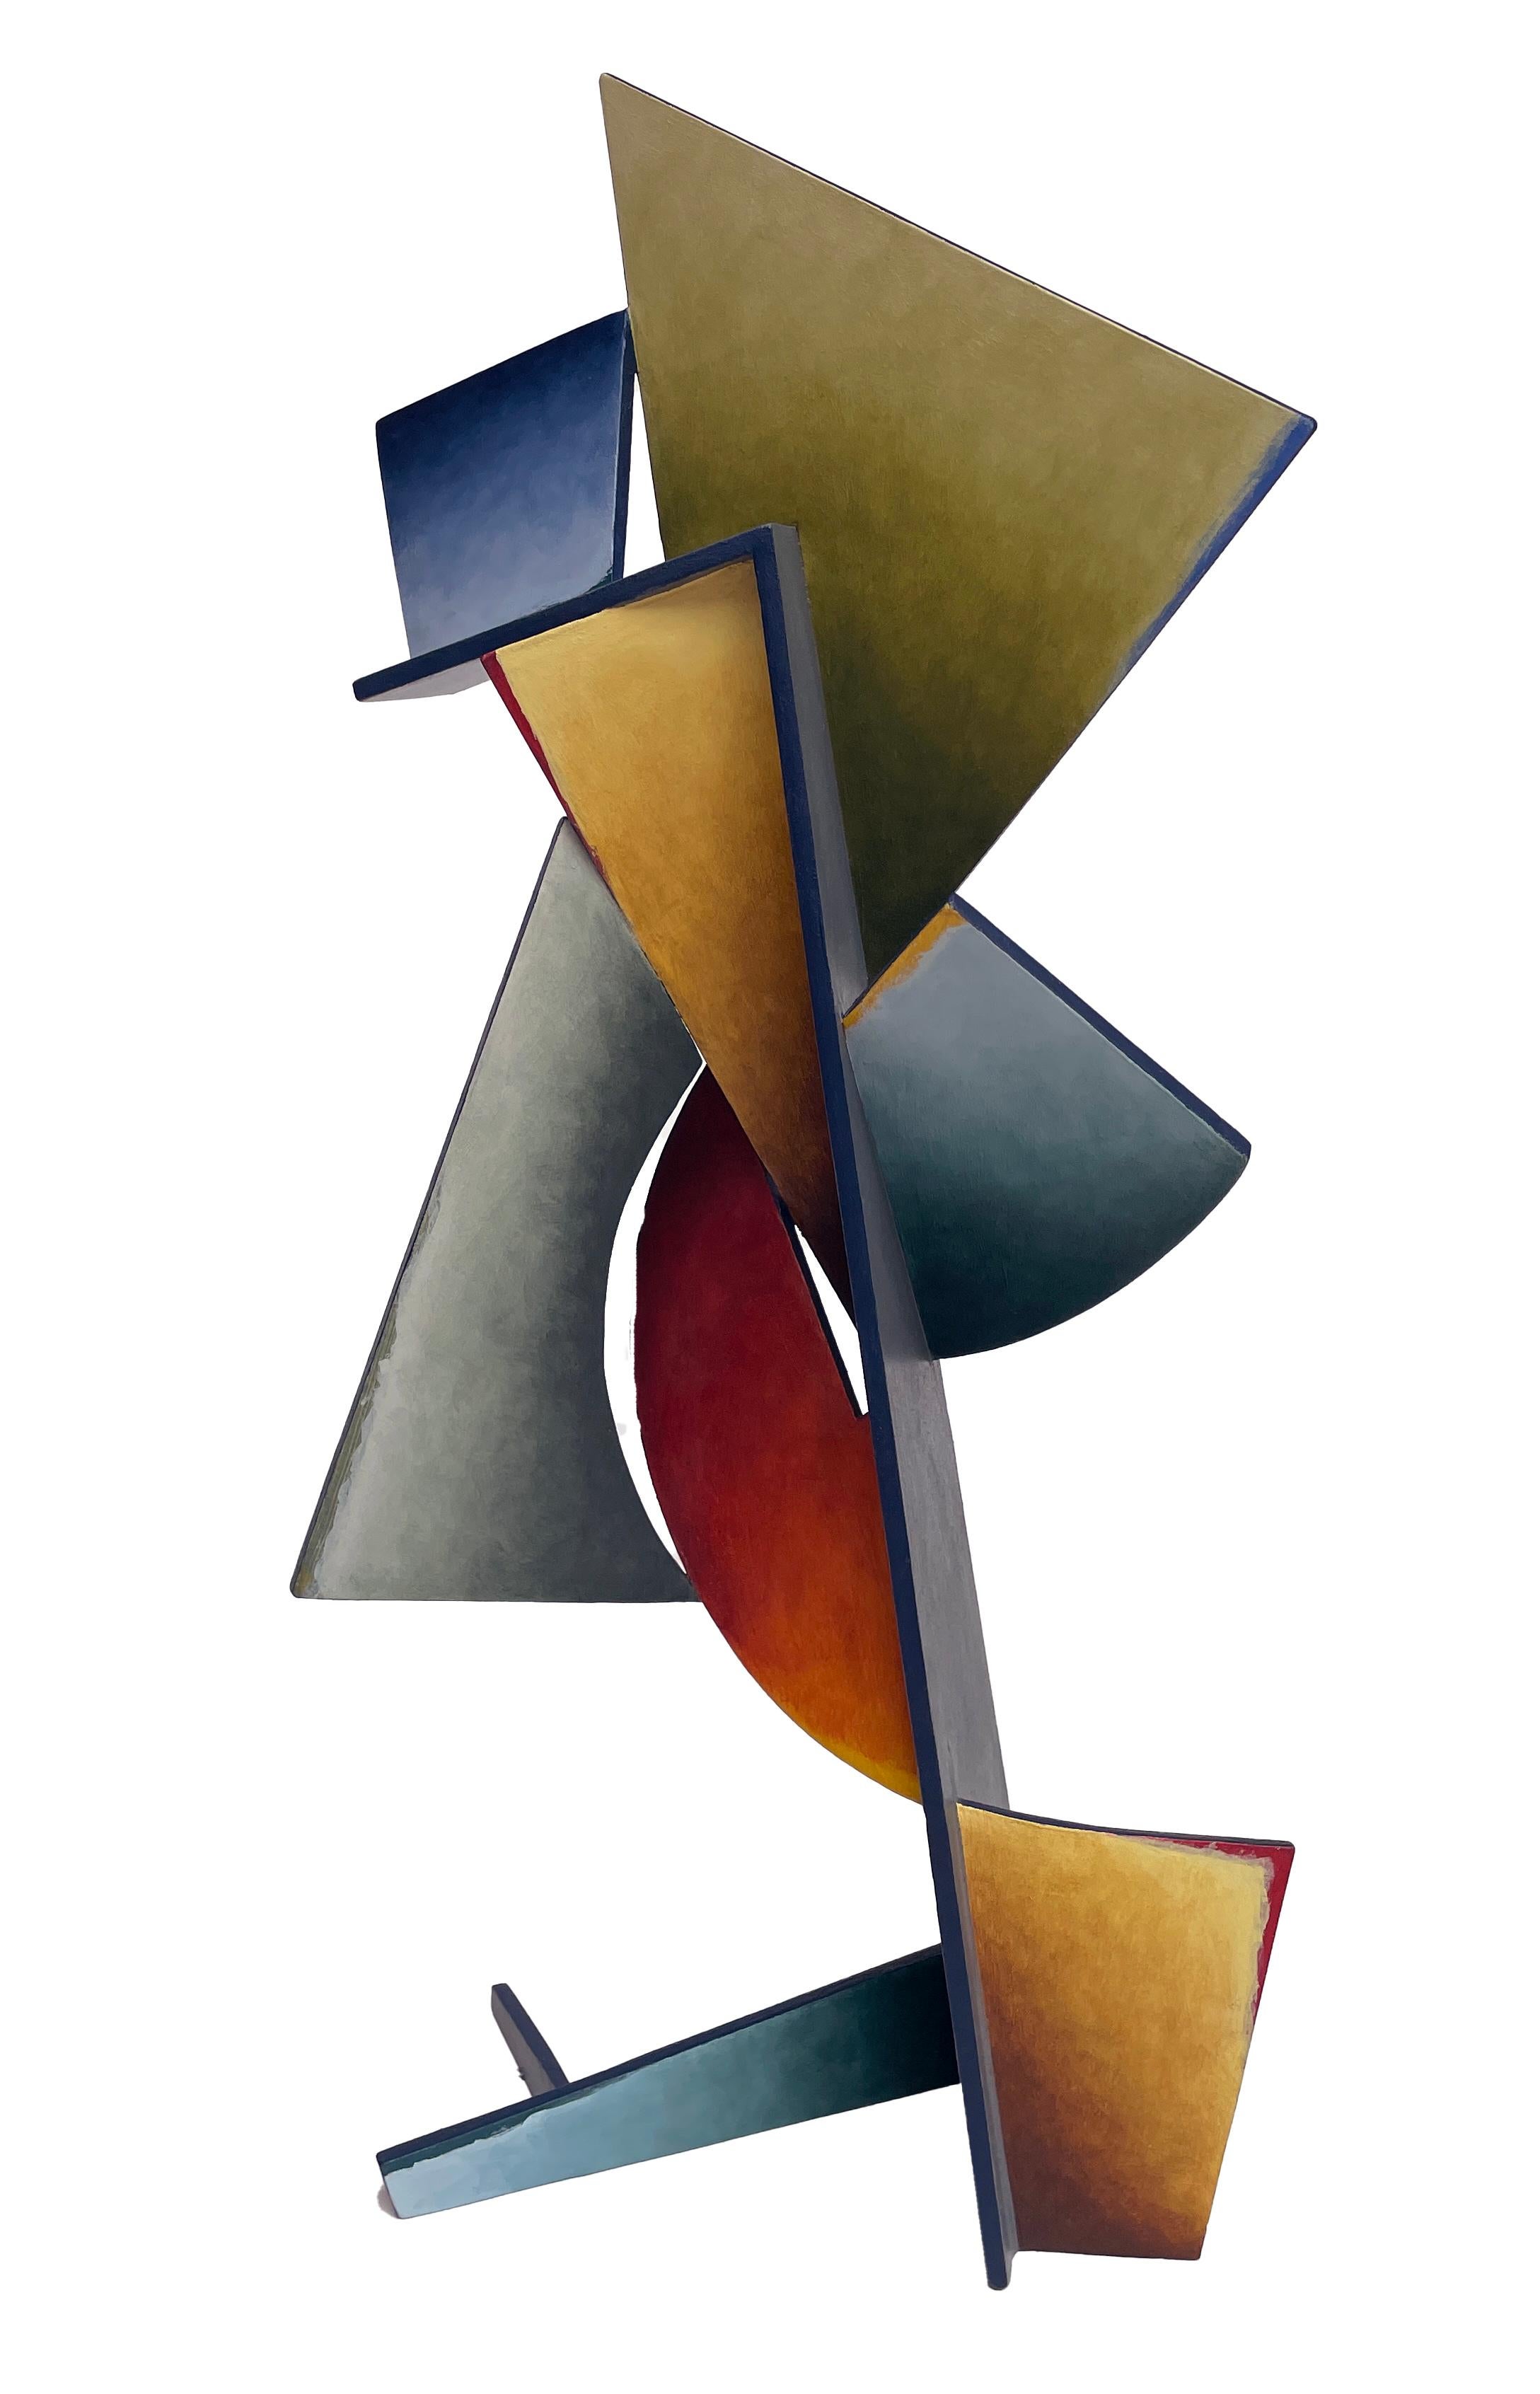 Nightfall Dreams - Abstract Geometric Form, Hand Painted Welded Steel Sculpture 